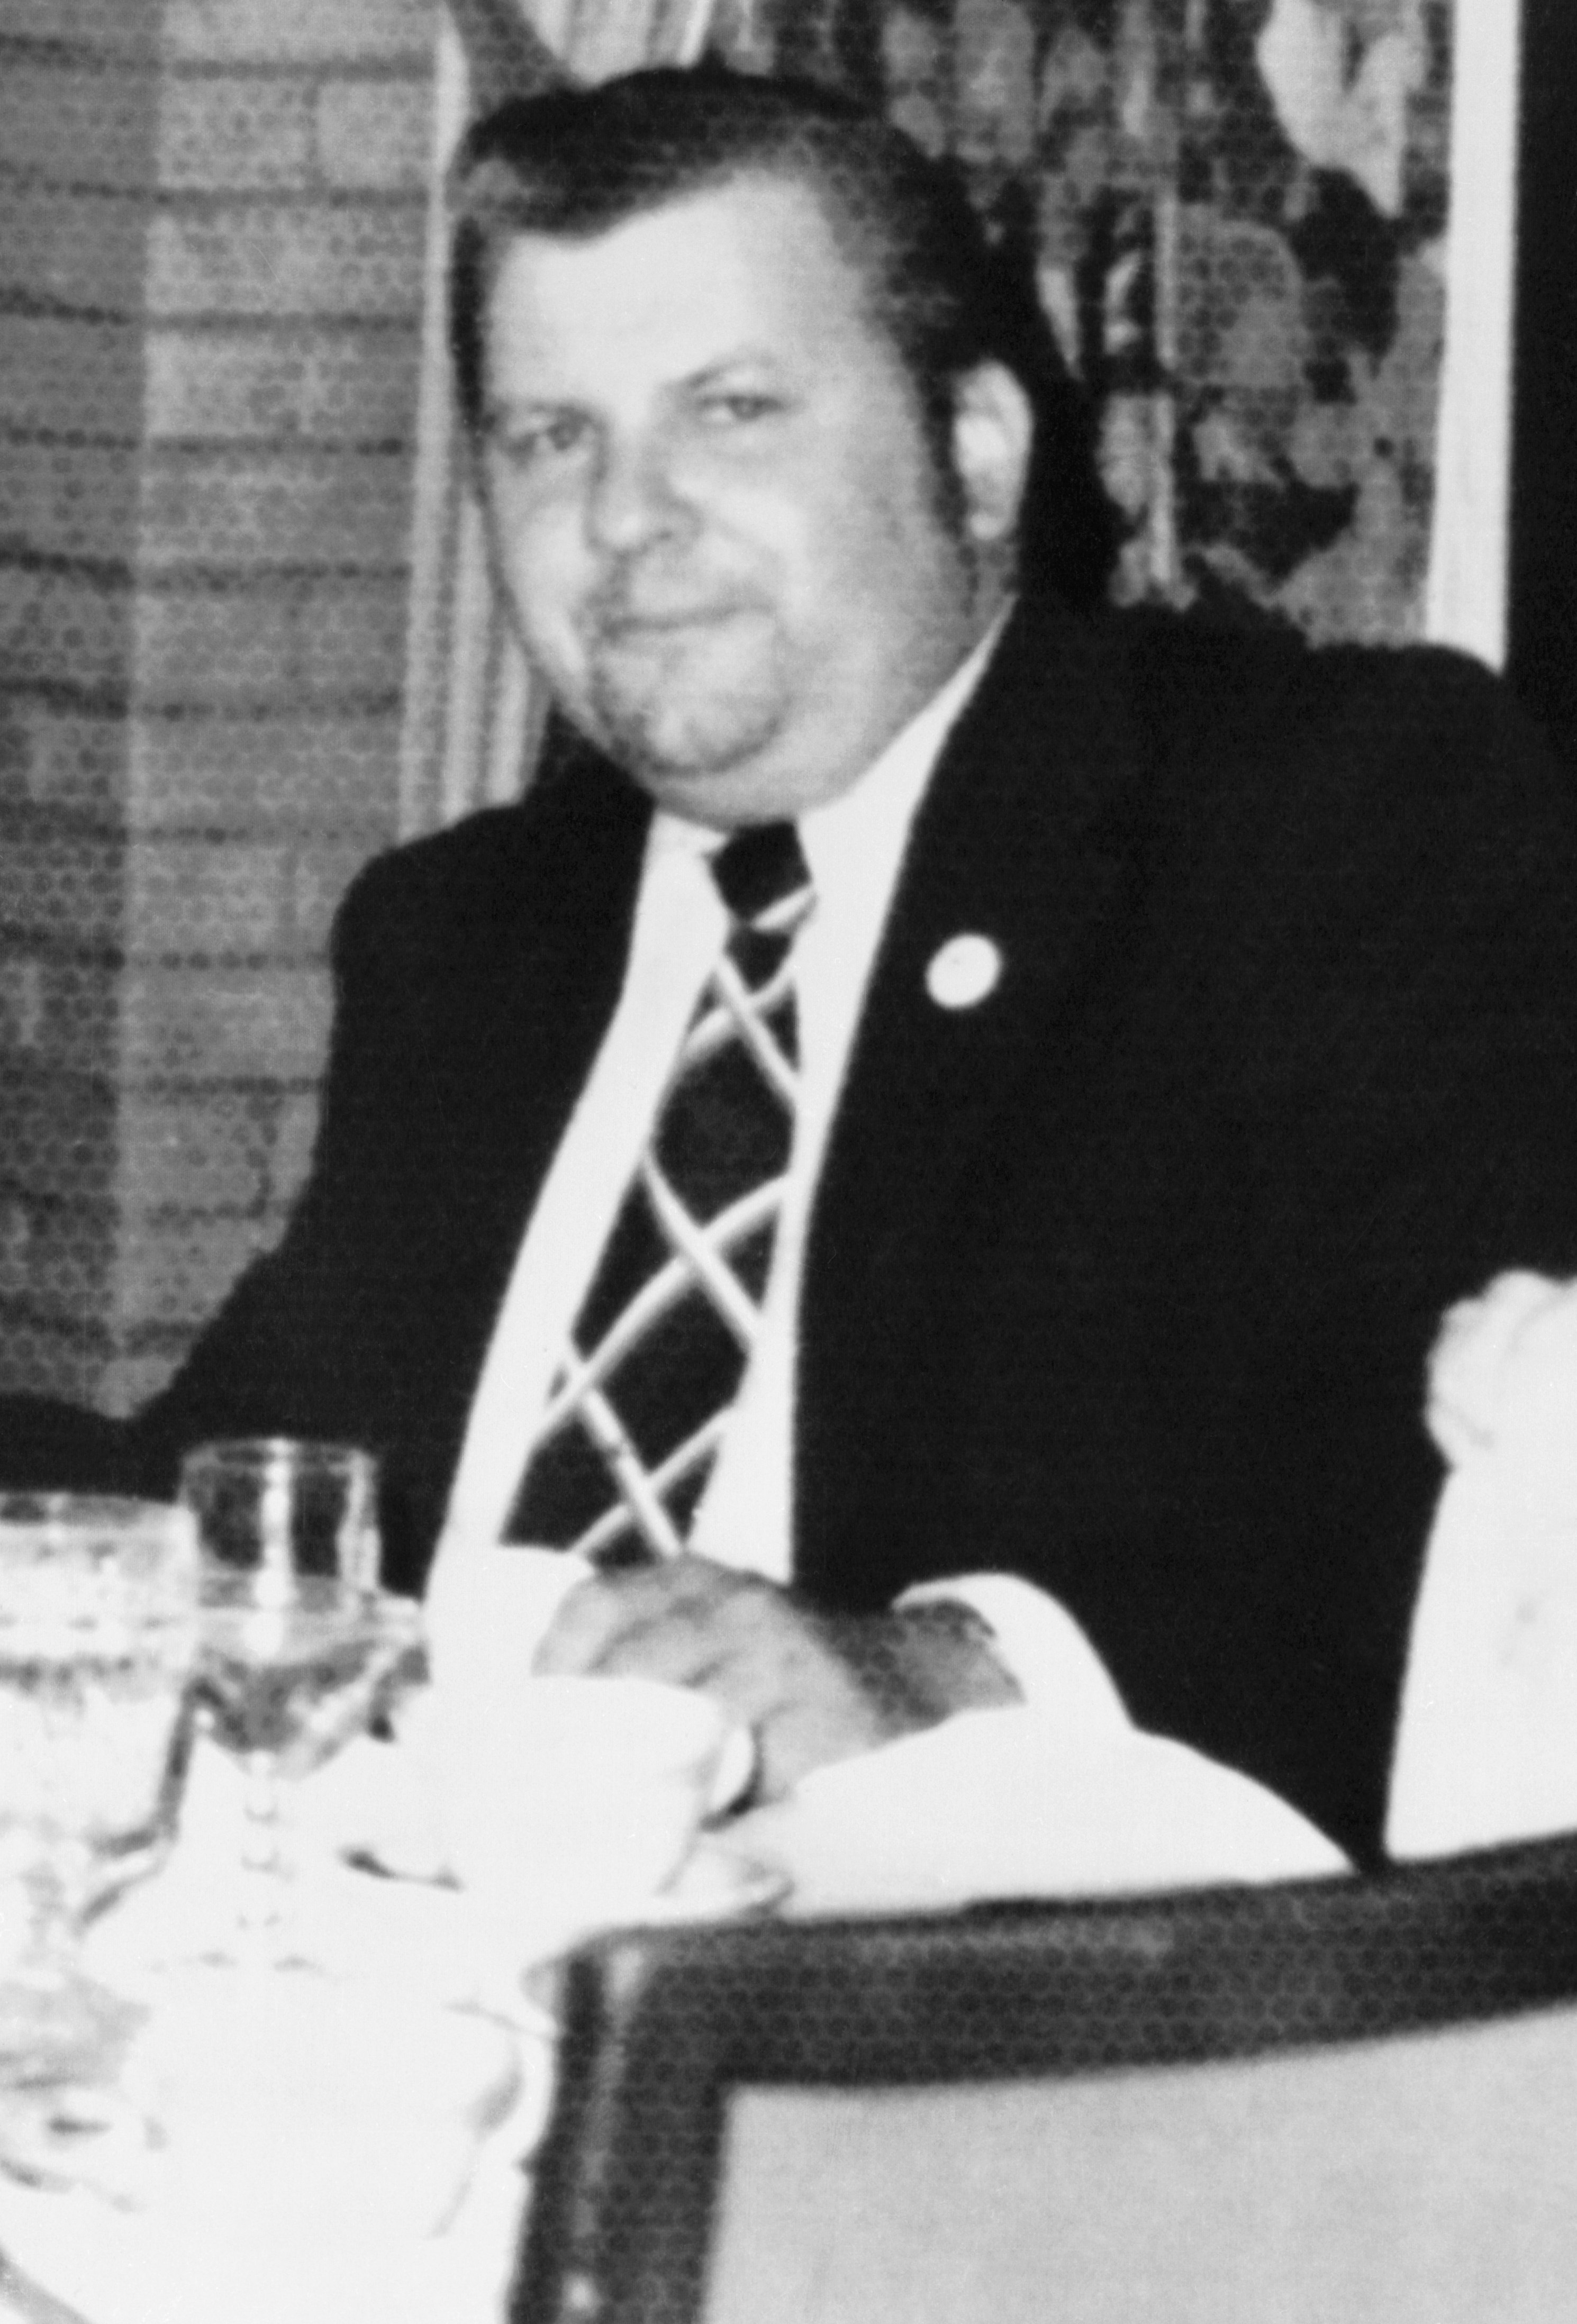 John Wayne Gacy photographed sitting at a table on December 28, 1978. | Source: Getty Images